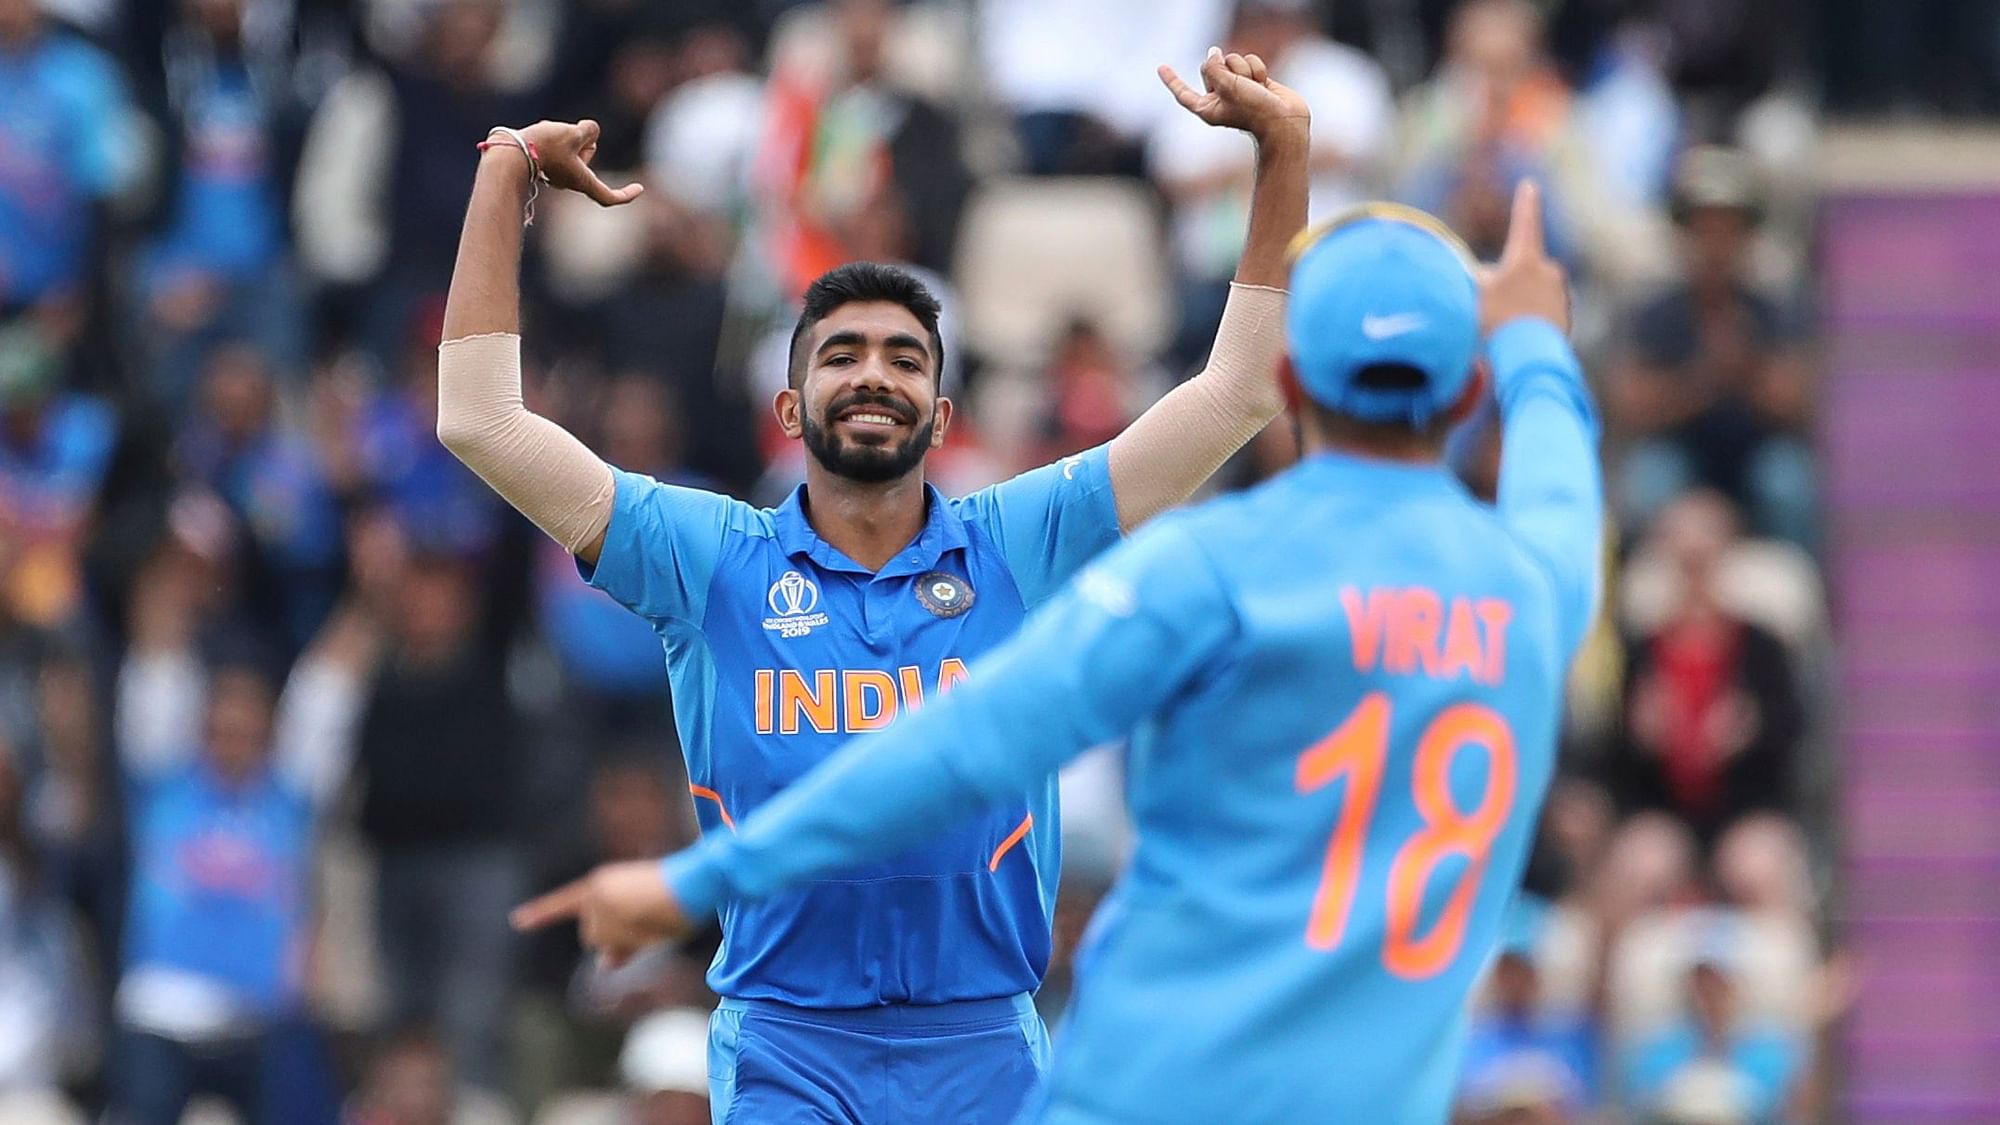 Virat Kohli lauded Rohit Sharma’s match-wining hundred against South Africa besides raving about his star pacer Jasprit Bumrah.